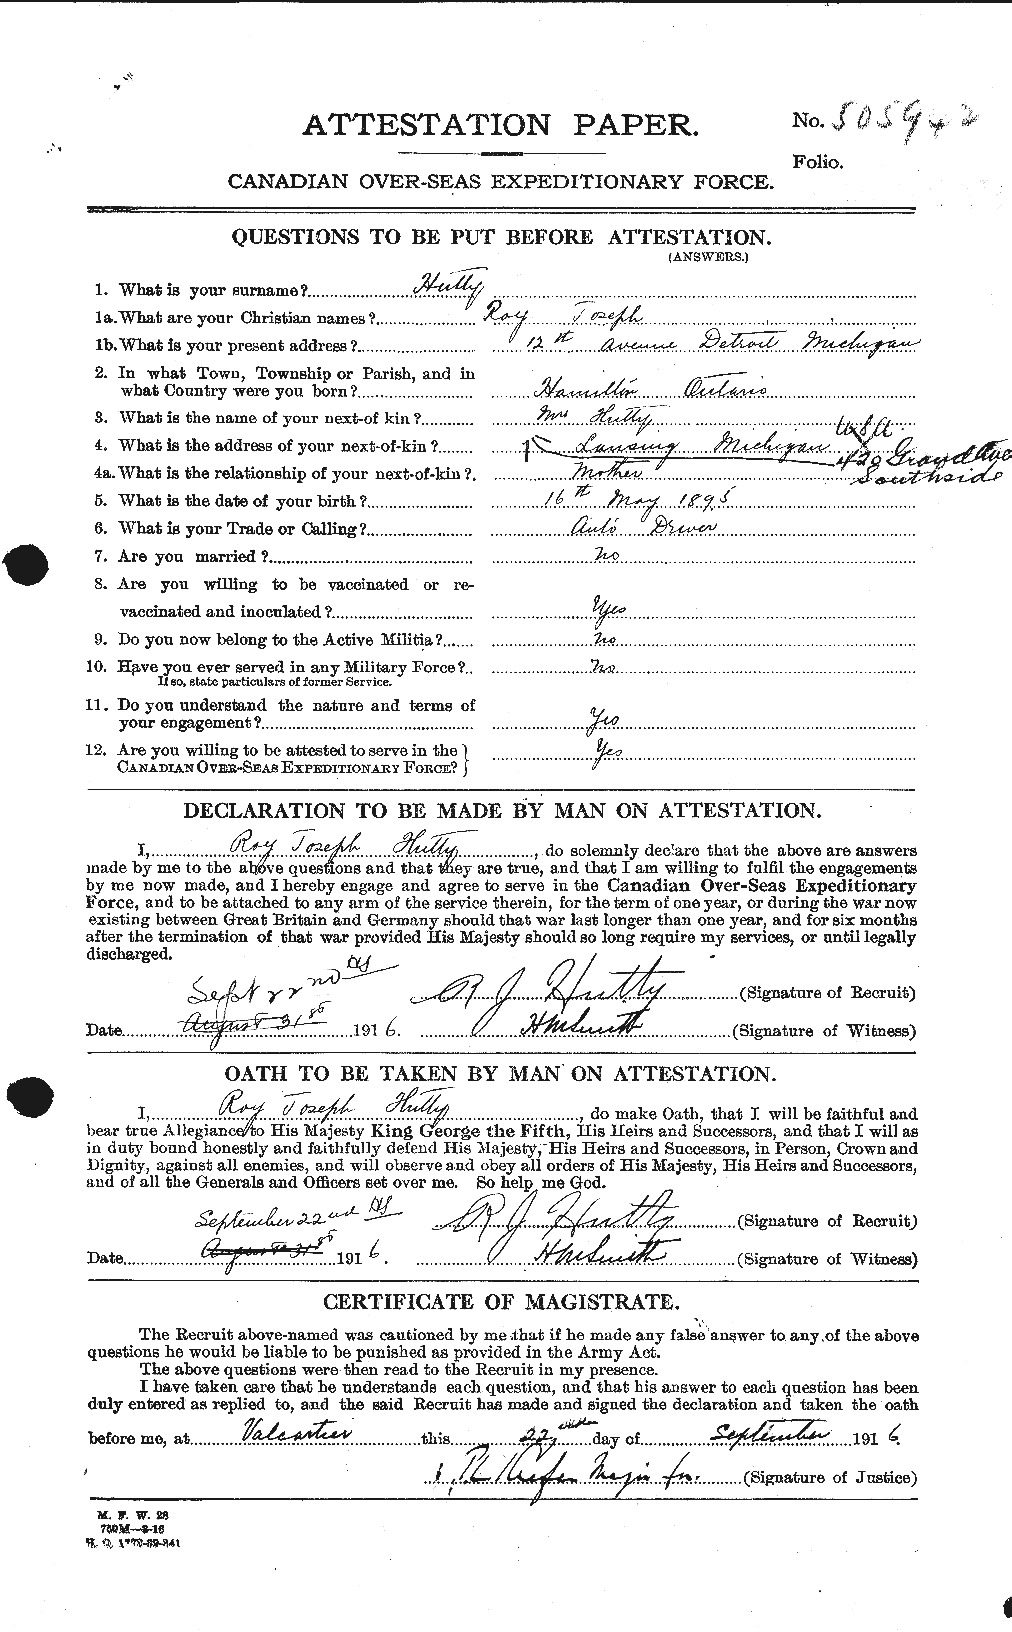 Personnel Records of the First World War - CEF 406992a